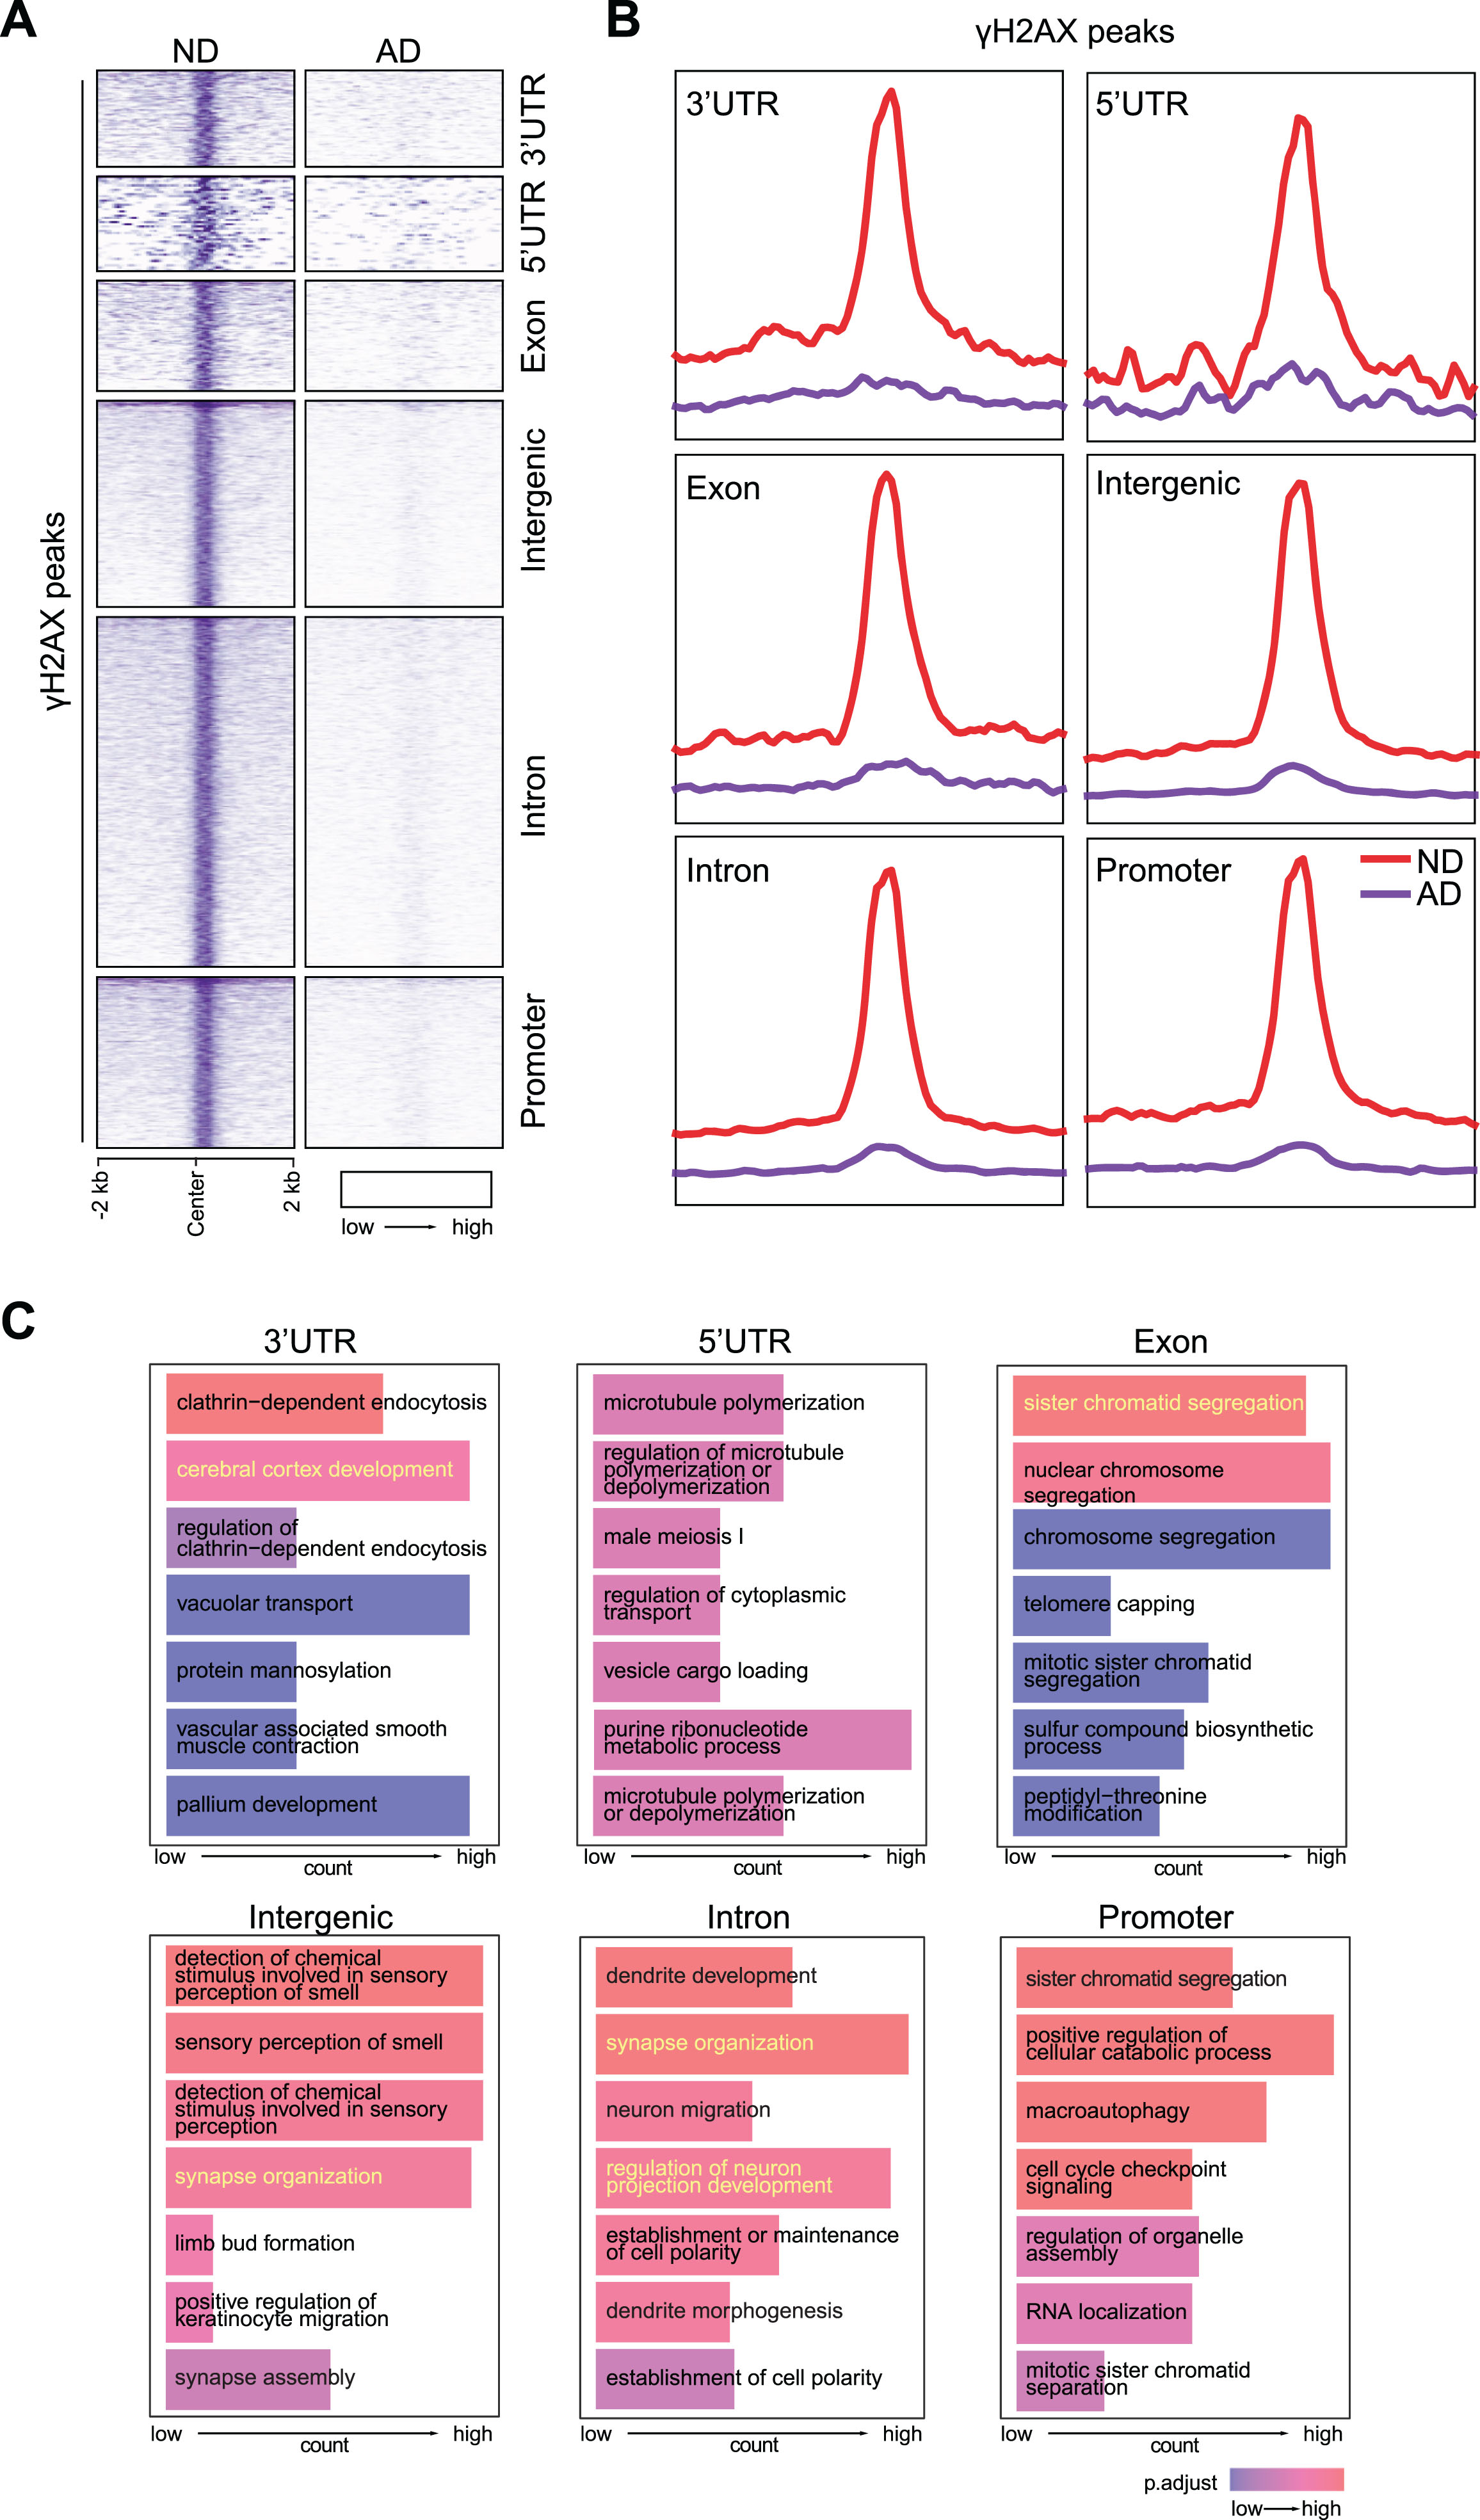 Loss of CUT&RUN γH2AX peaks in AD brain. A) Heatmaps showing distribution of γH2AX peaks at 3’UTR, 5’UTR, exon, intergenic region, intron, and promoter. B) Distribution of γH2AX peaks in a±2 kb window at 3’UTR, 5’UTR, exon, intergenic region, intron, and promoter. C) GO analysis for PAR peaks at 3’UTR, 5’UTR, exon, intergenic region, intron, and promoter.